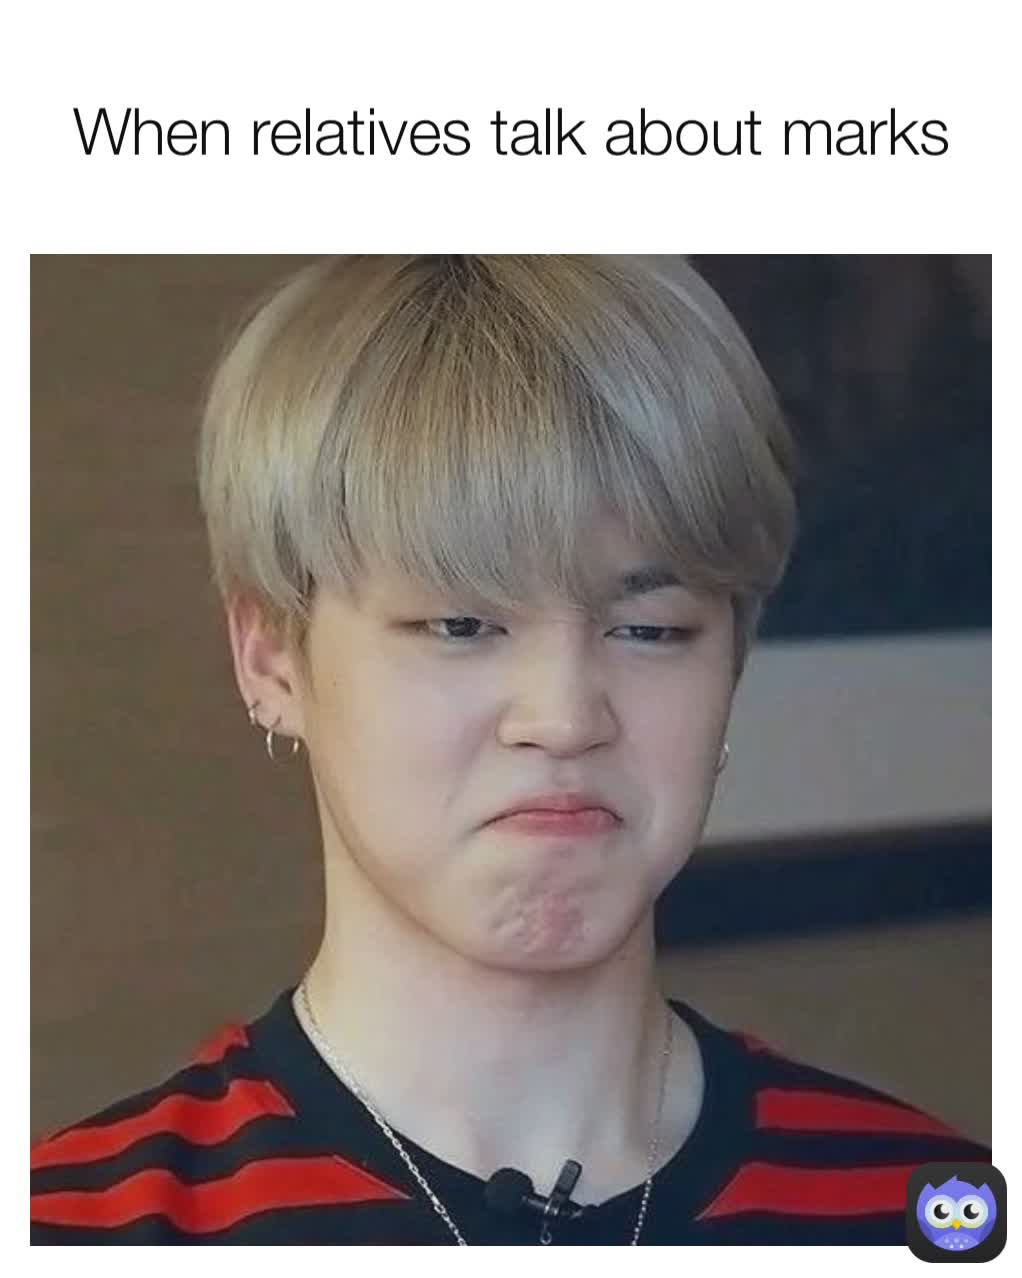 When relatives talk about marks